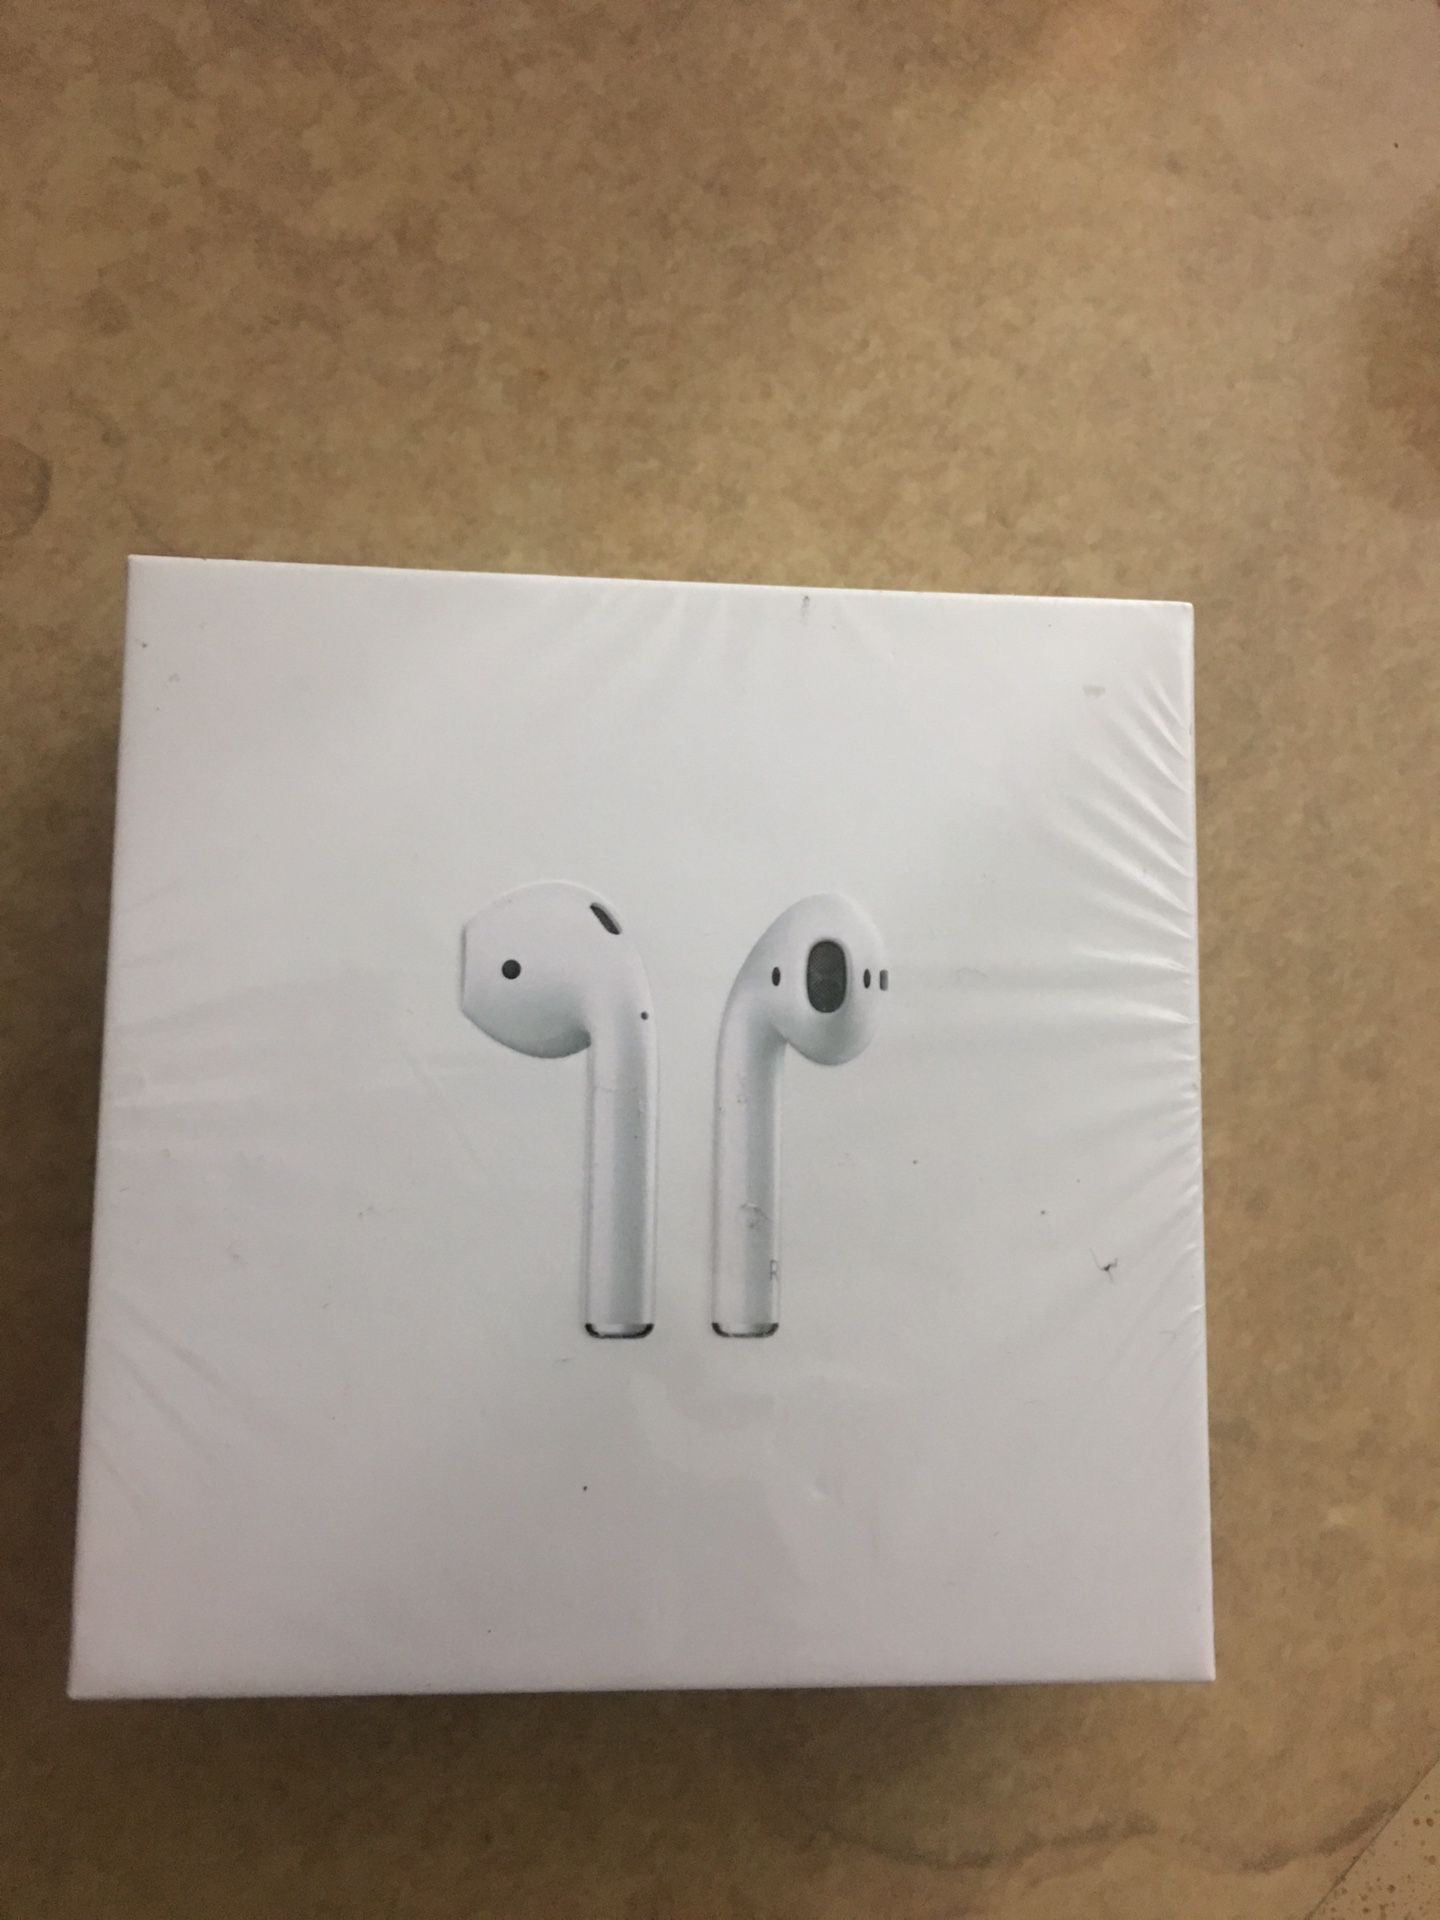 Apple AirPods series 2